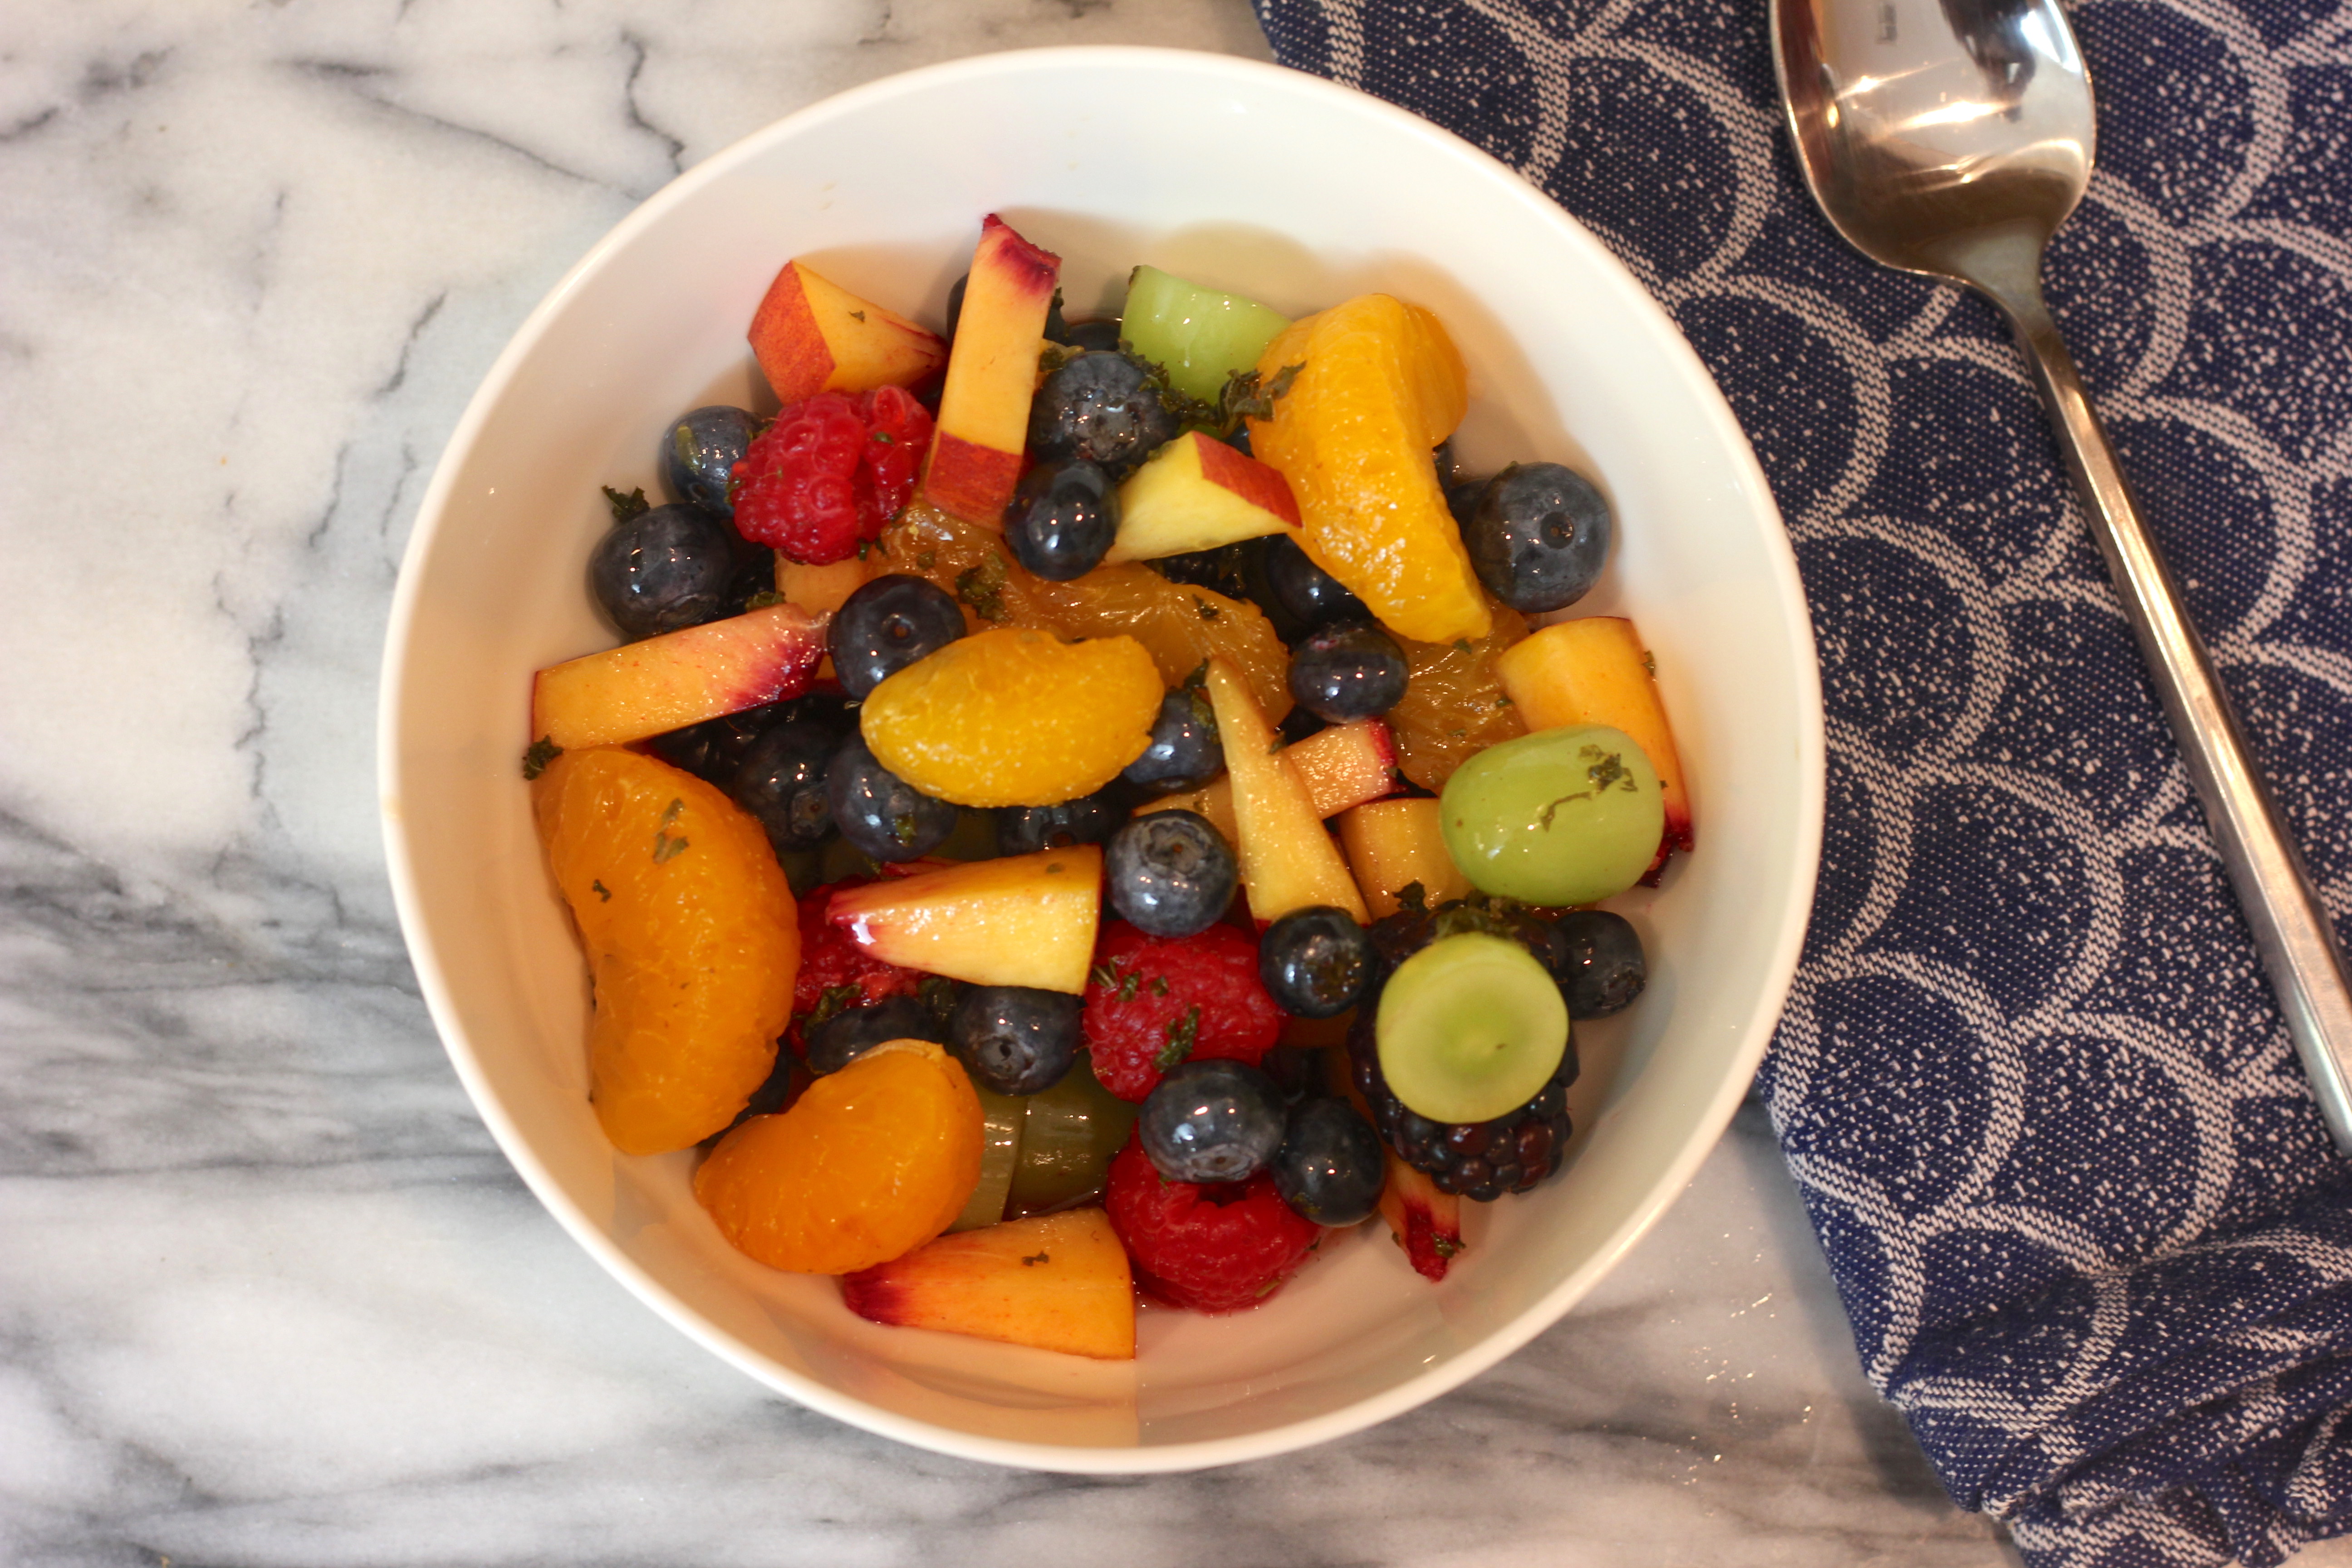 Fruit salad recipe with mint simple syrup